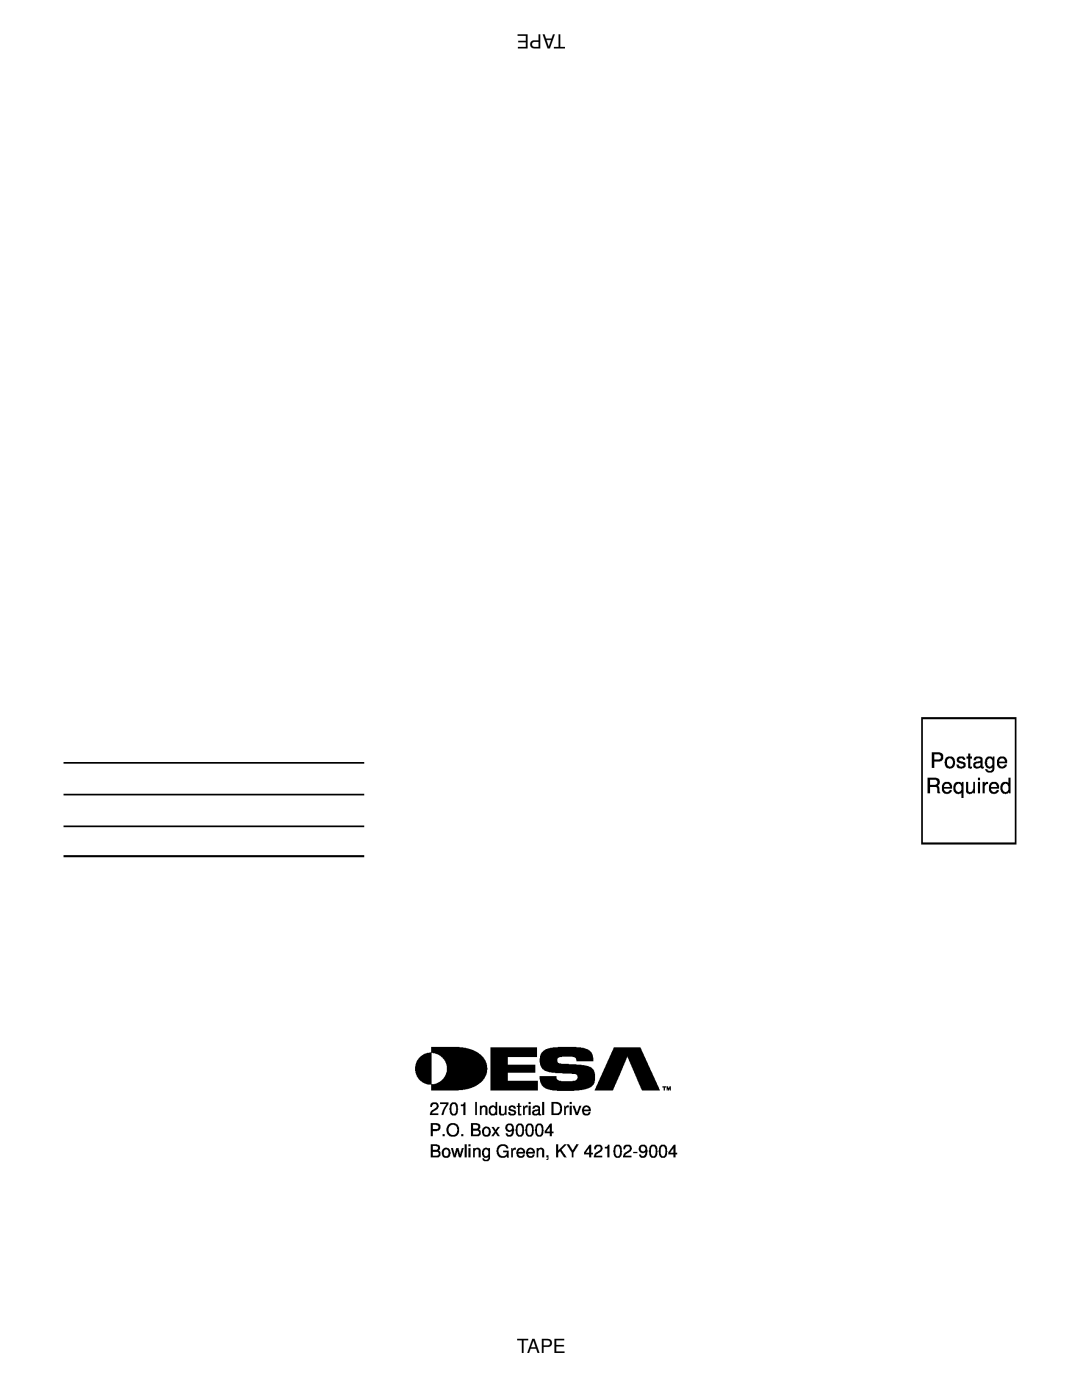 Desa T32P, T32N installation manual Tape, Postage Required, Industrial Drive P.O. Box Bowling Green, KY 